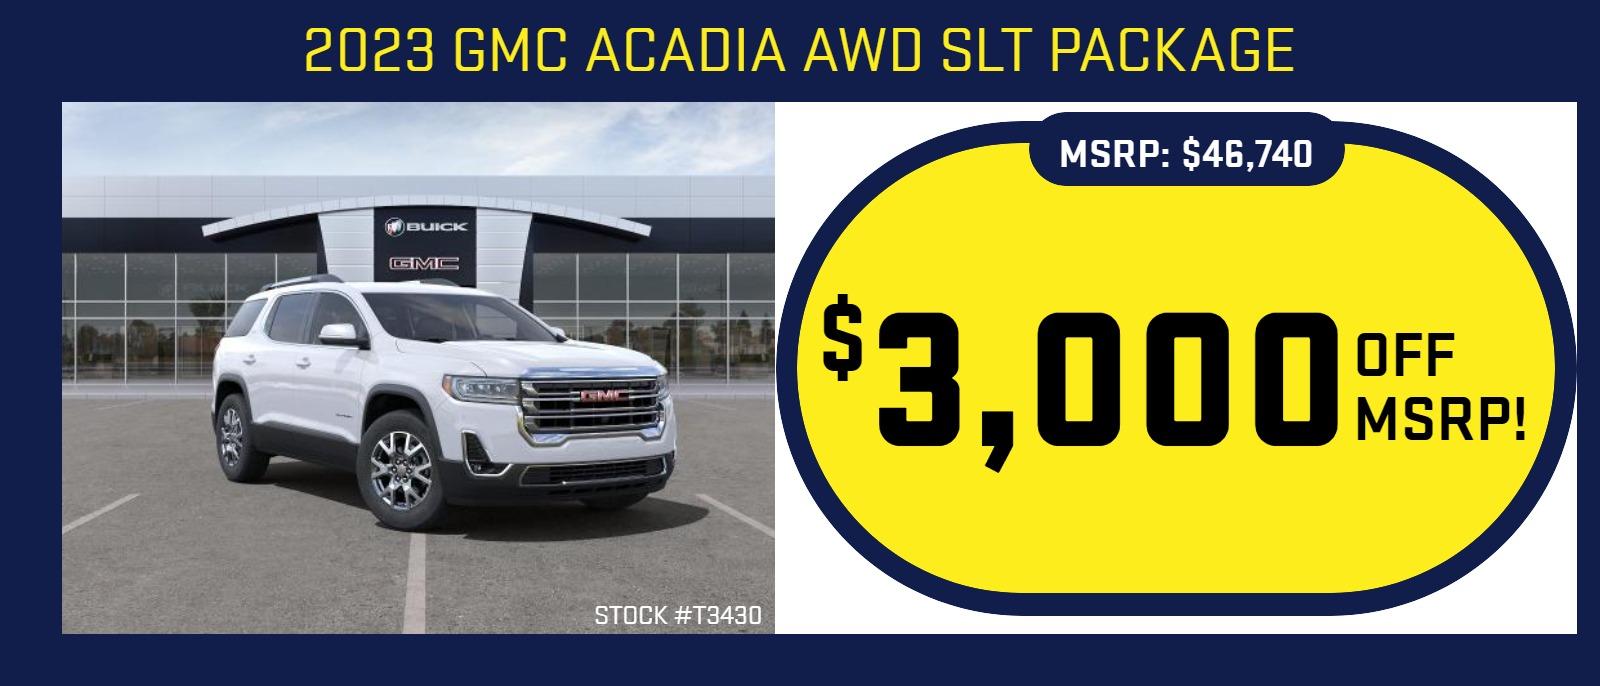 2023 GMC Acadia AWD SLT Package
Stock #T3430
MSRP: $46,740
$3,000 OFF MSRP